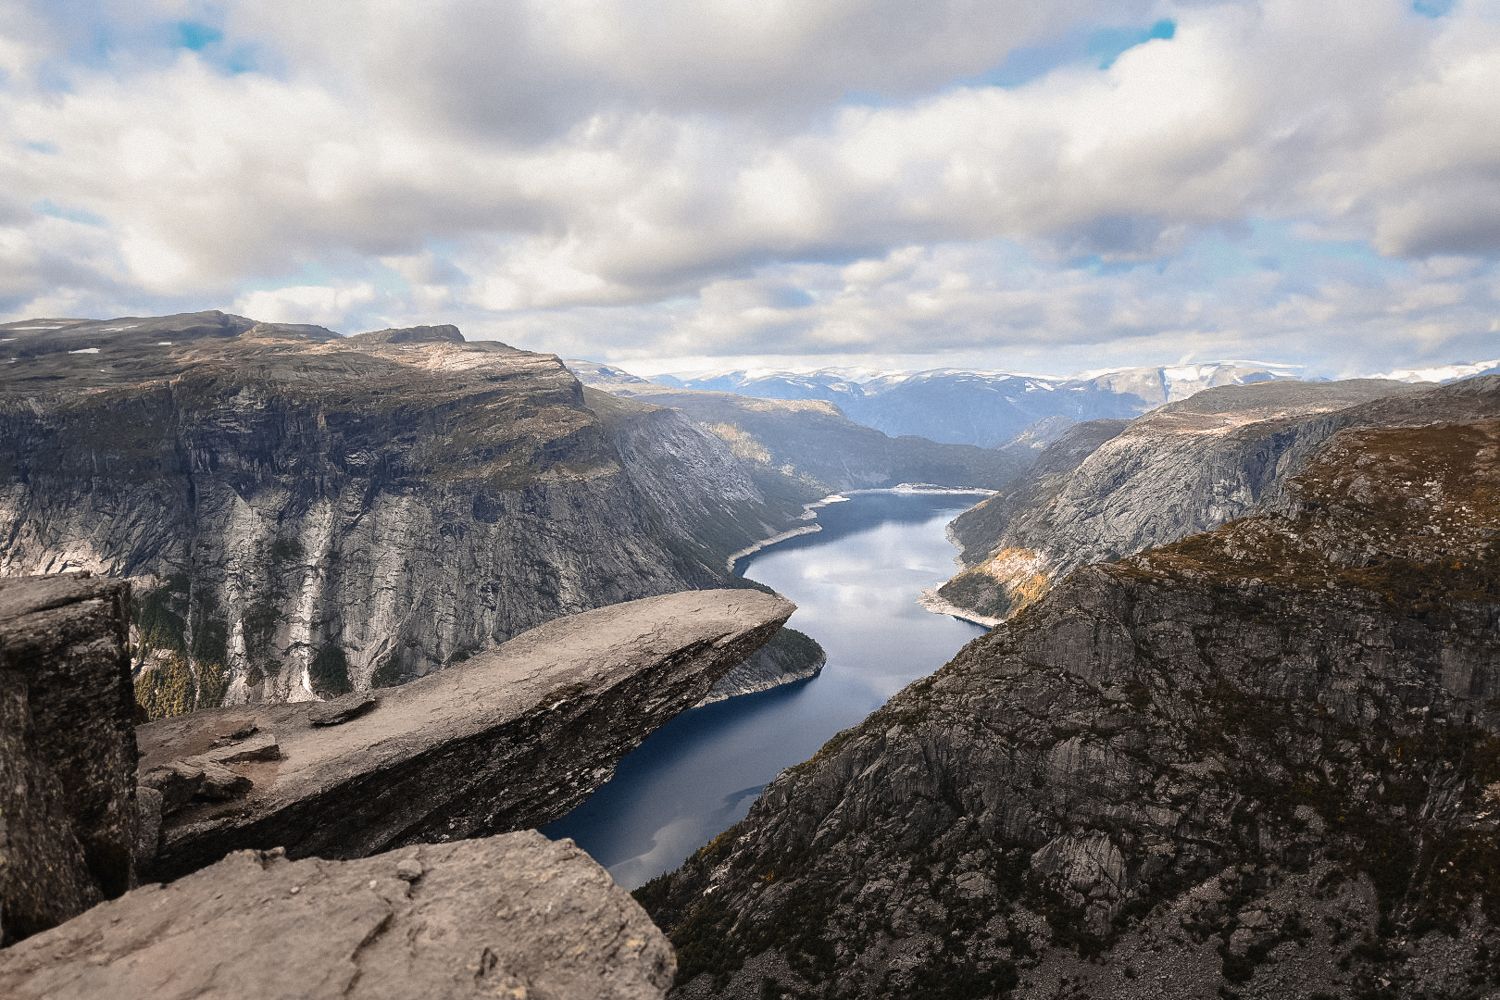 The Trolltunga hike can be a bit difficult, but leads to such a spectacular view.